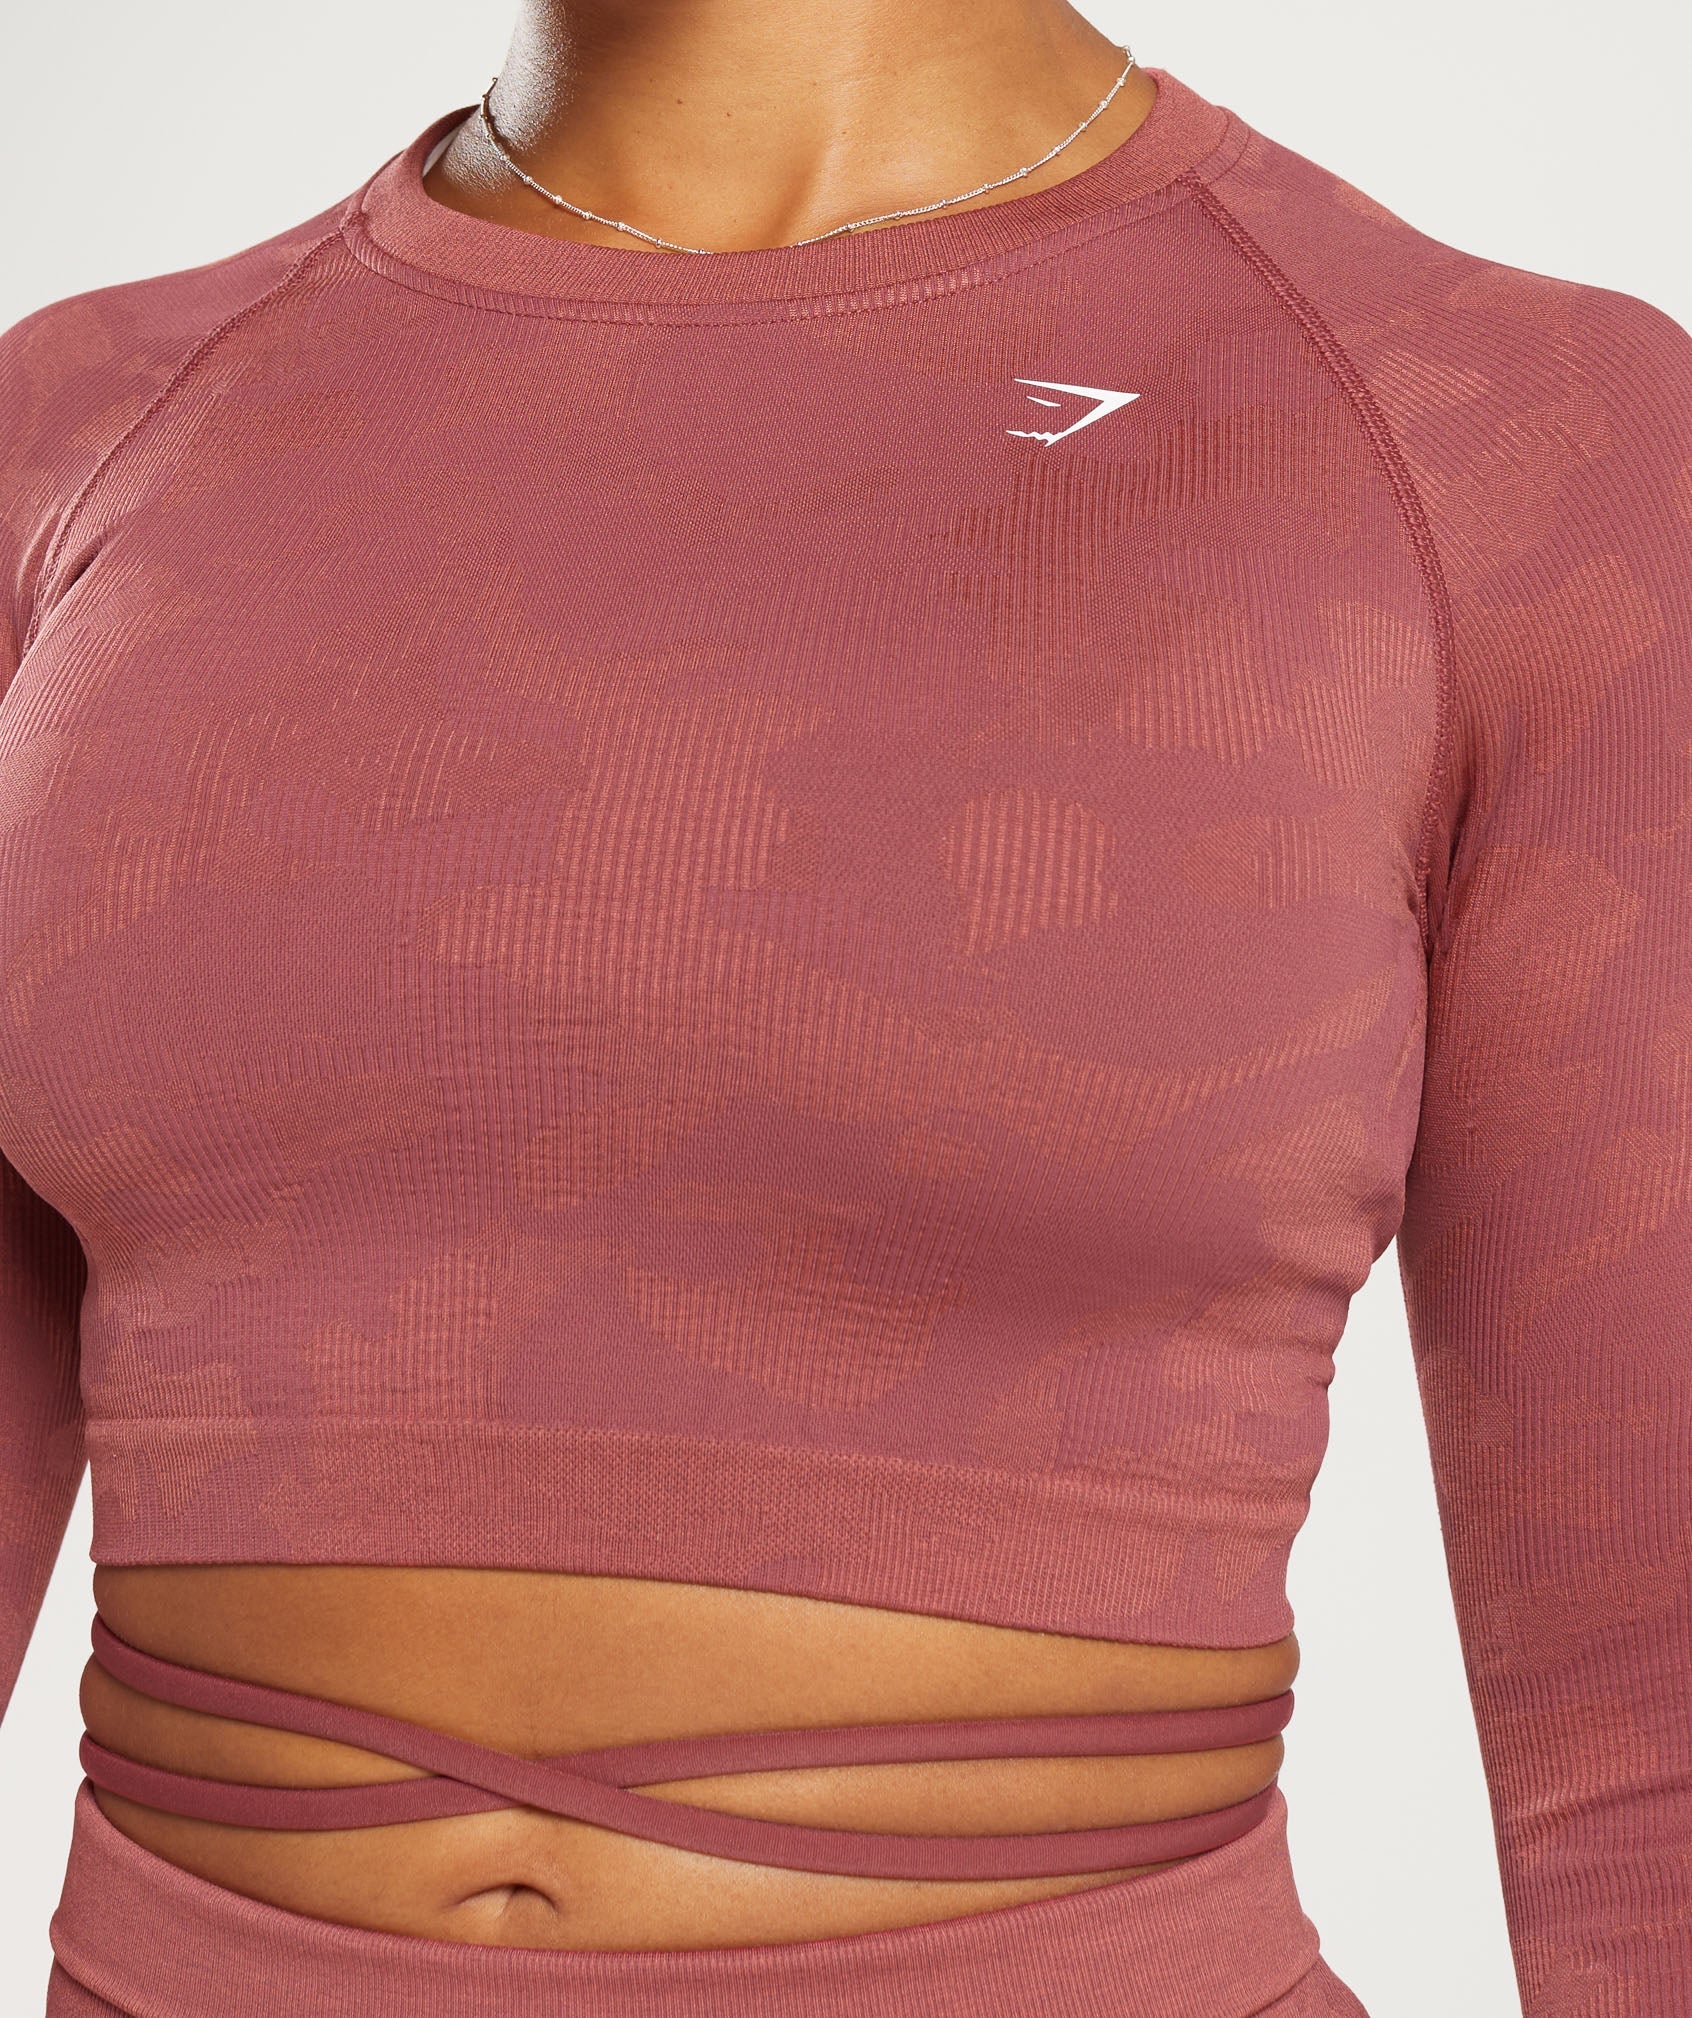 Adapt Camo Seamless Ribbed Long Sleeve Crop Top in Soft Berry/Sunbaked Pink - view 5